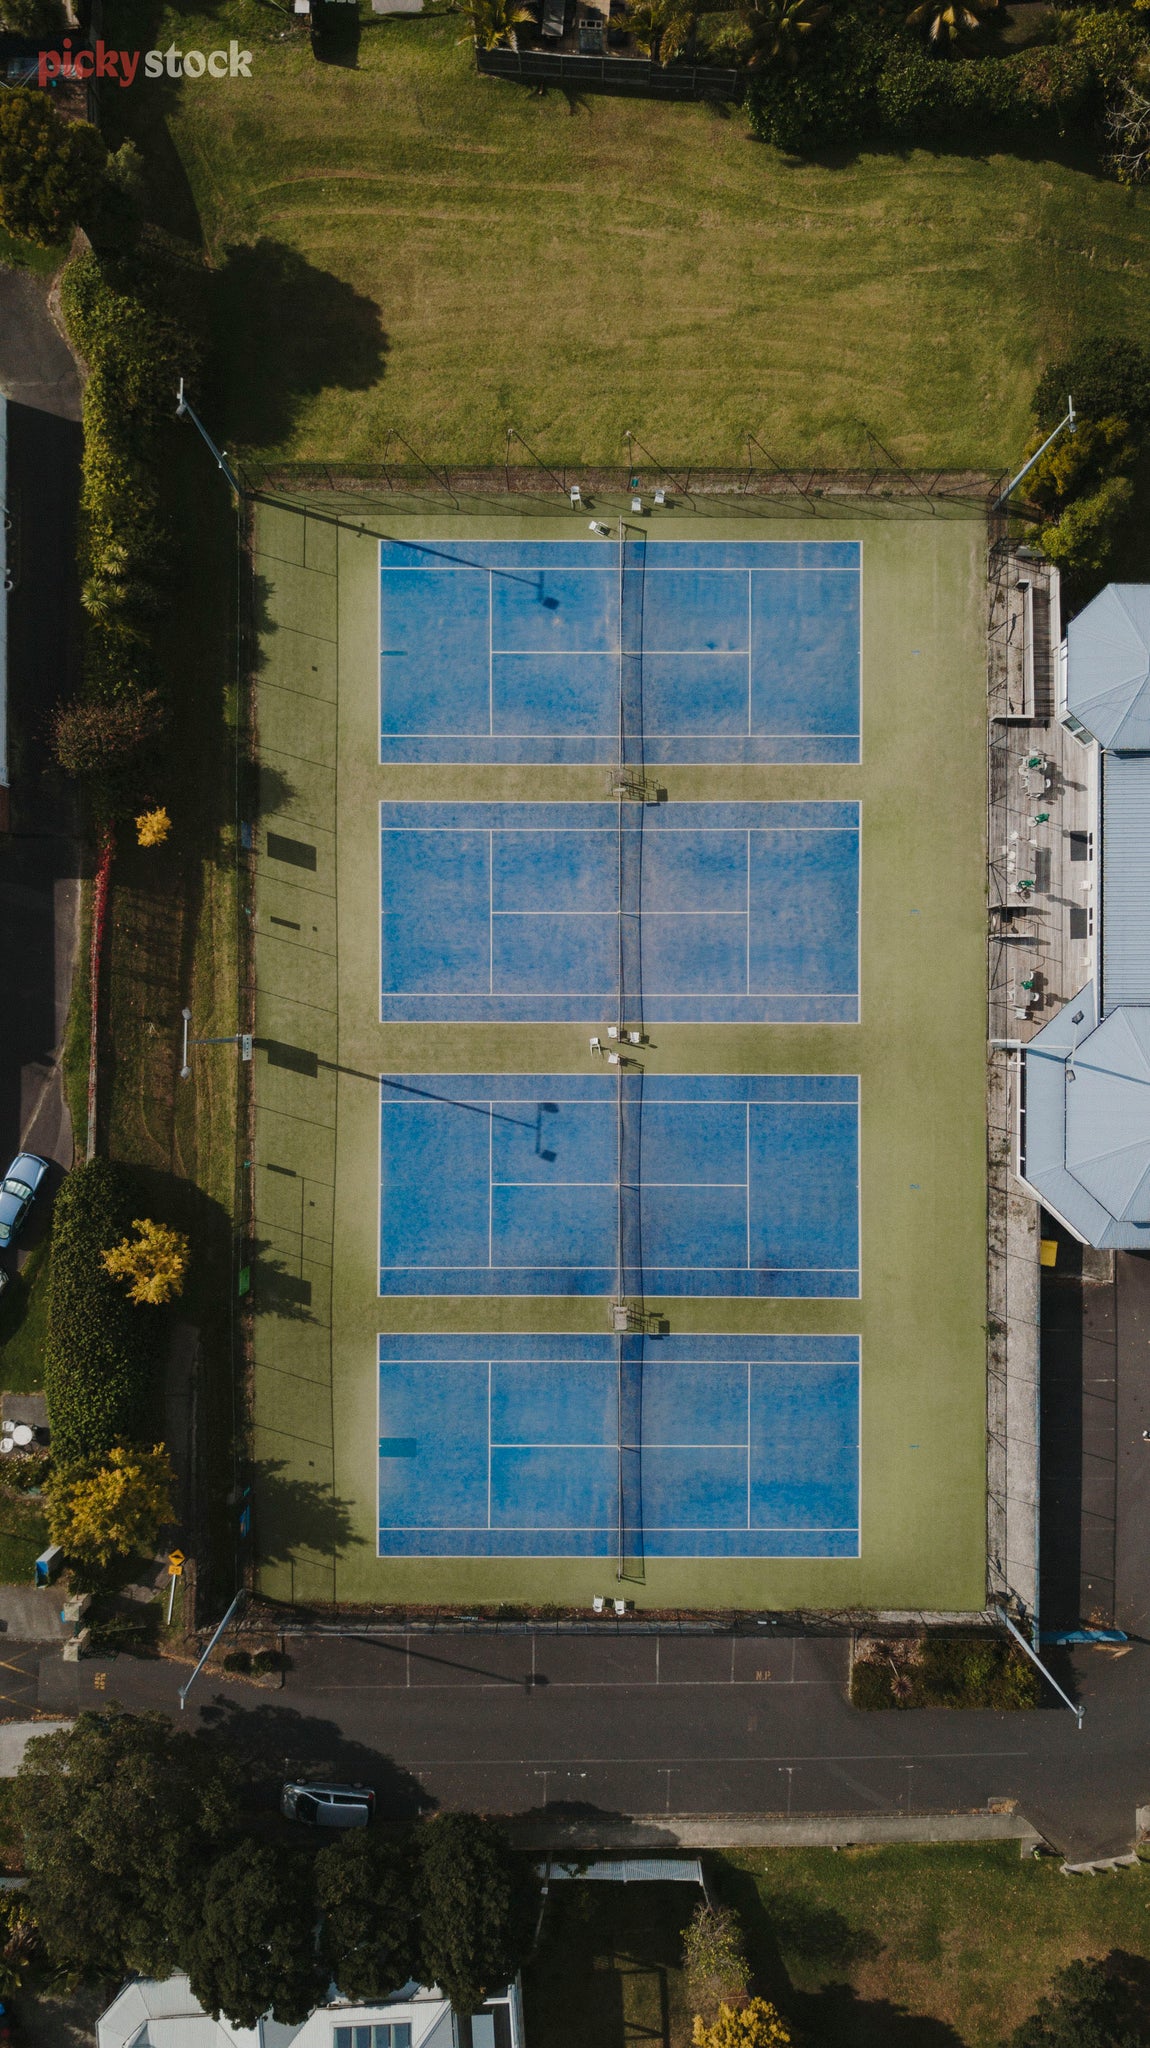 Aerial image of four blue empty tennis courts, surrounded by green grass. 